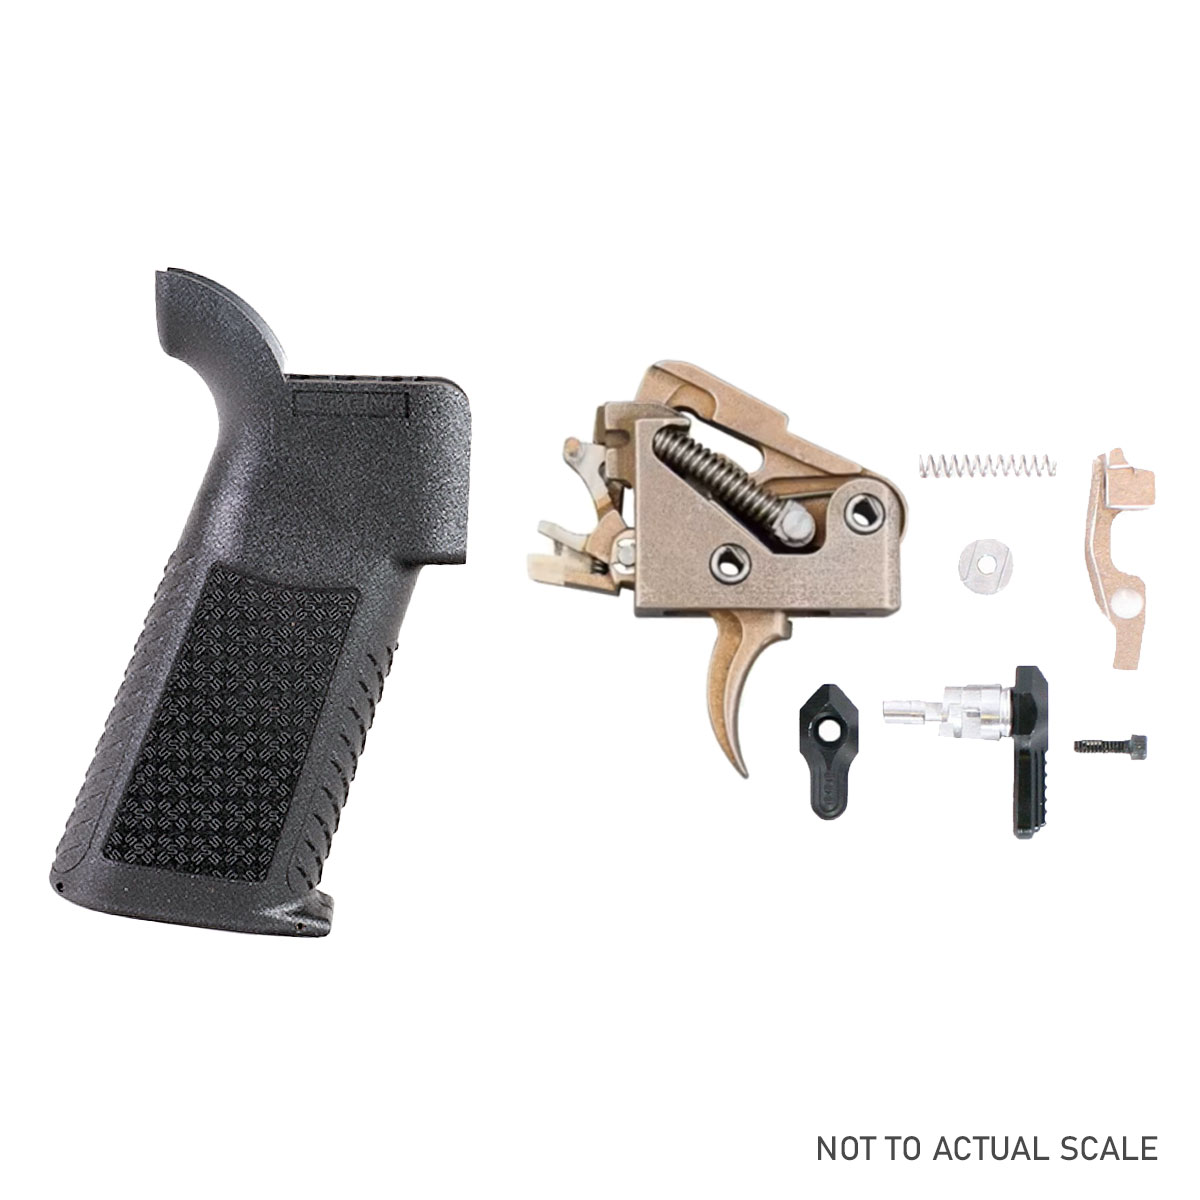 Speed Up Your Lower Kit: Fostech AR-15 Drop In Echo AR-II Binary Trigger + Amend2 AMEND2 AR-15/AR-10 PISTOL GRIP aggressive 19 degree angle high strength polymer